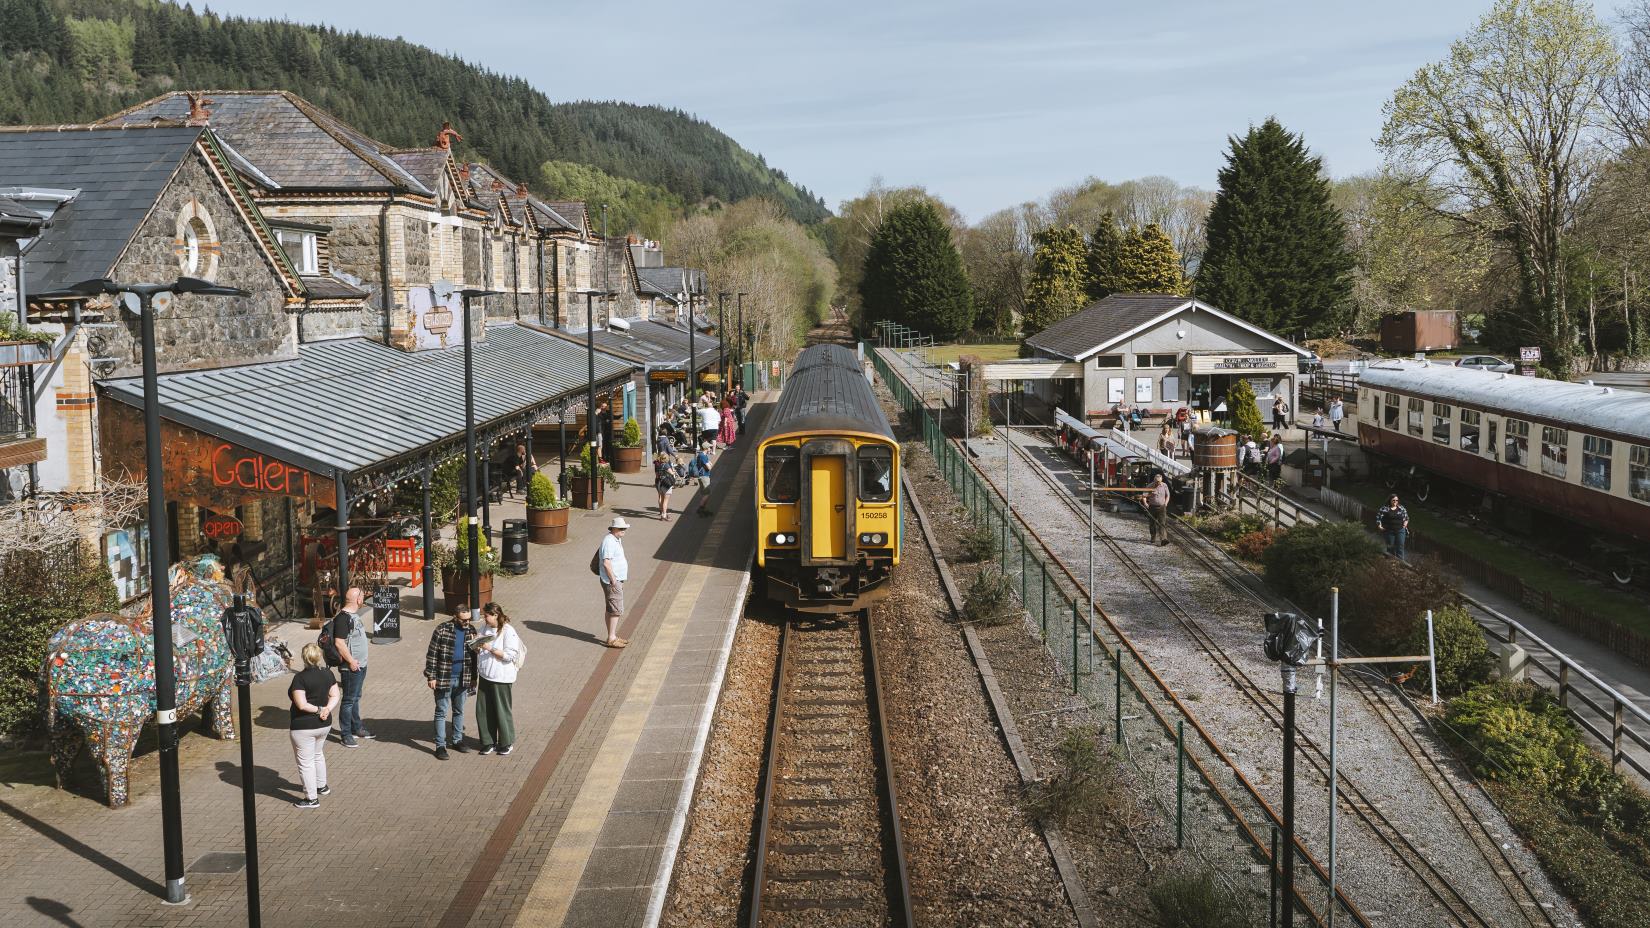 Train arriving at Betws y Coed station.